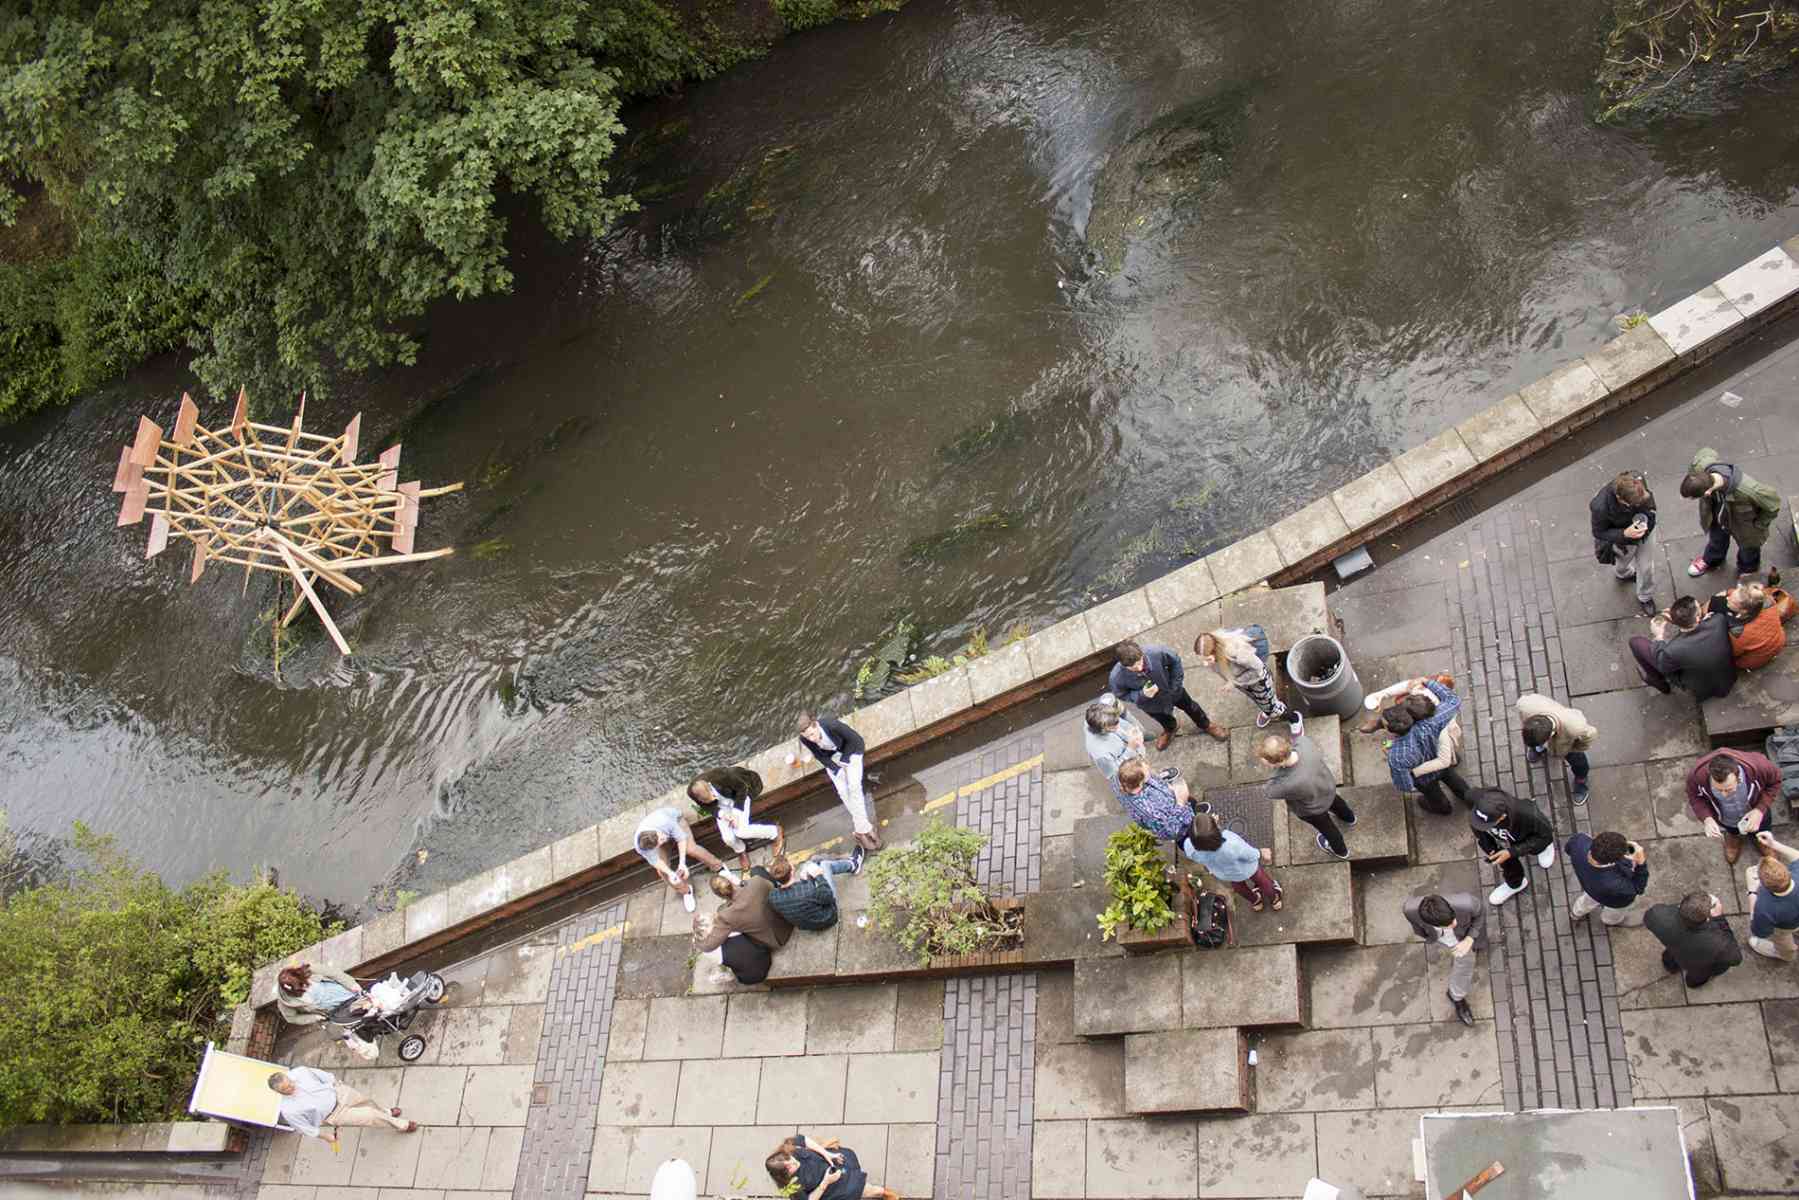 Live architecture project in situ in the Hogsmill River - Kingston School of Art, Knights Park